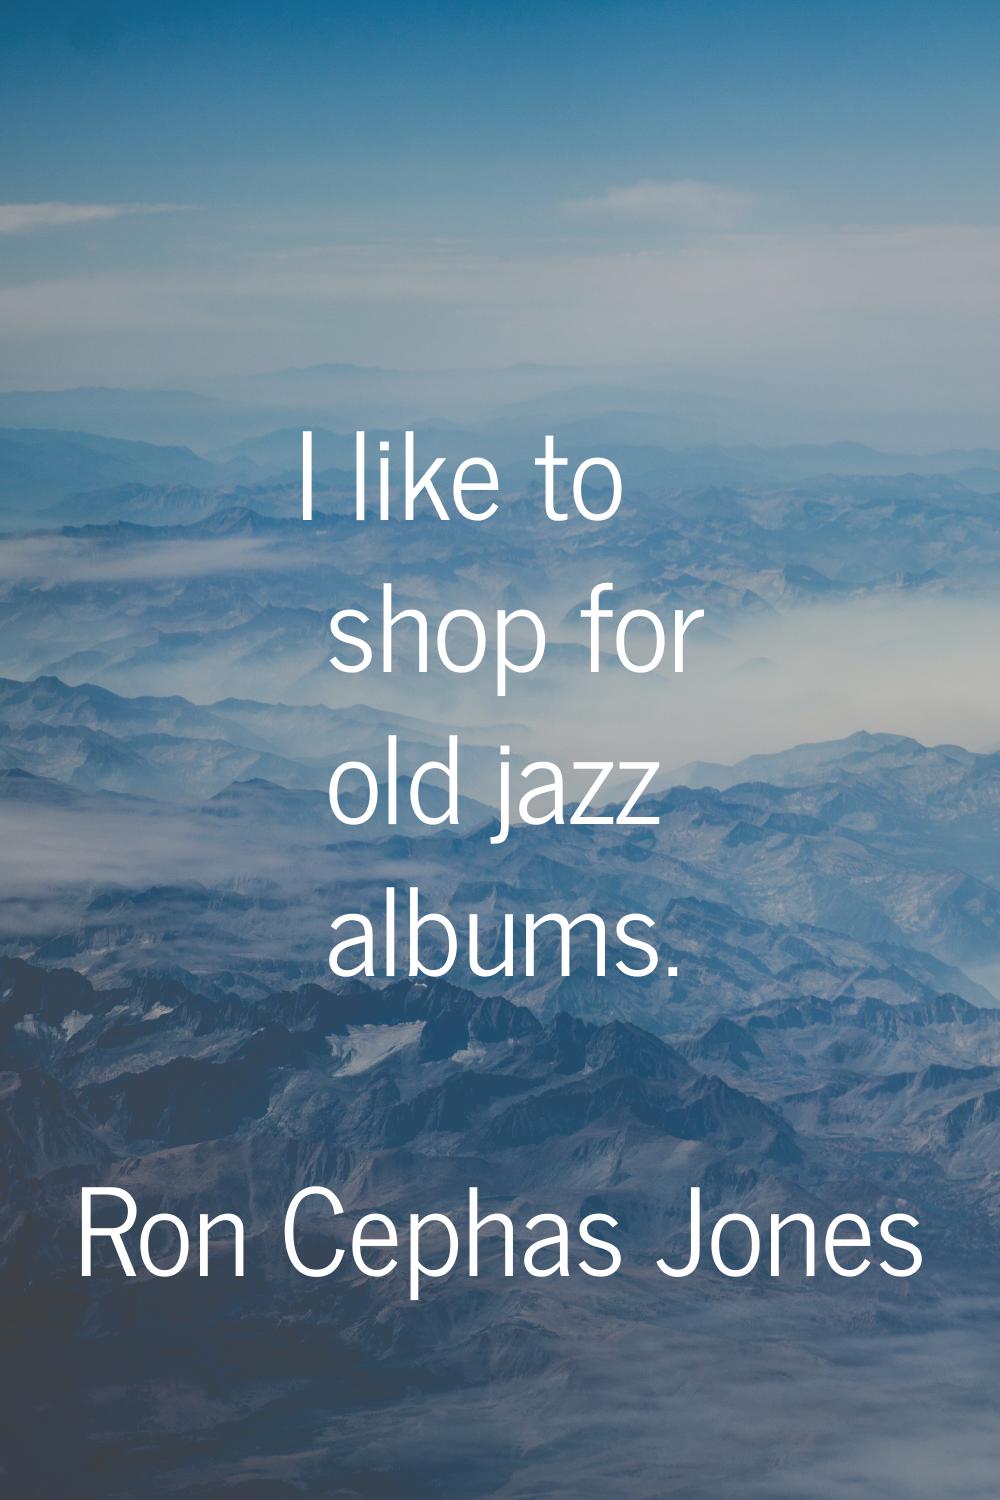 I like to shop for old jazz albums.